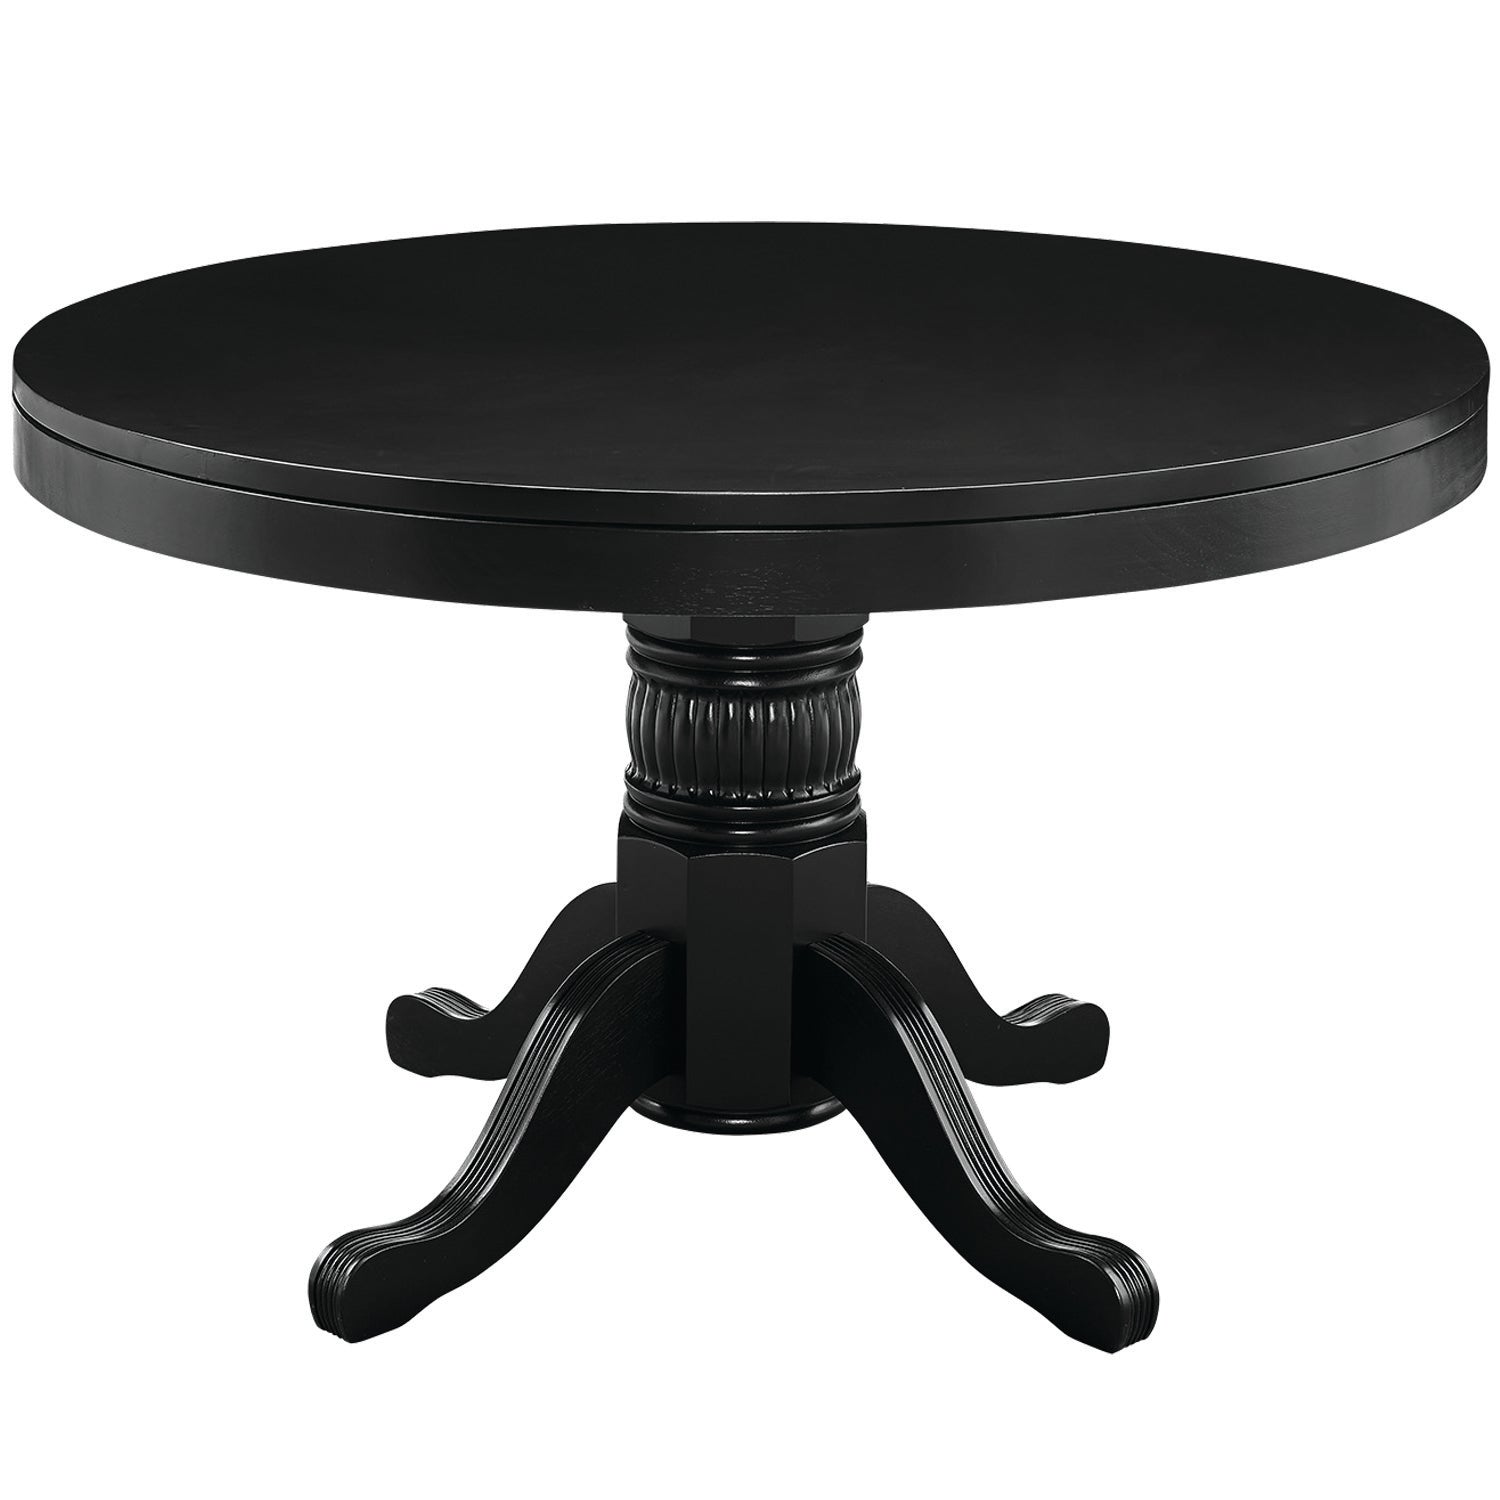 Round convertible game table with dining top in a black finish.